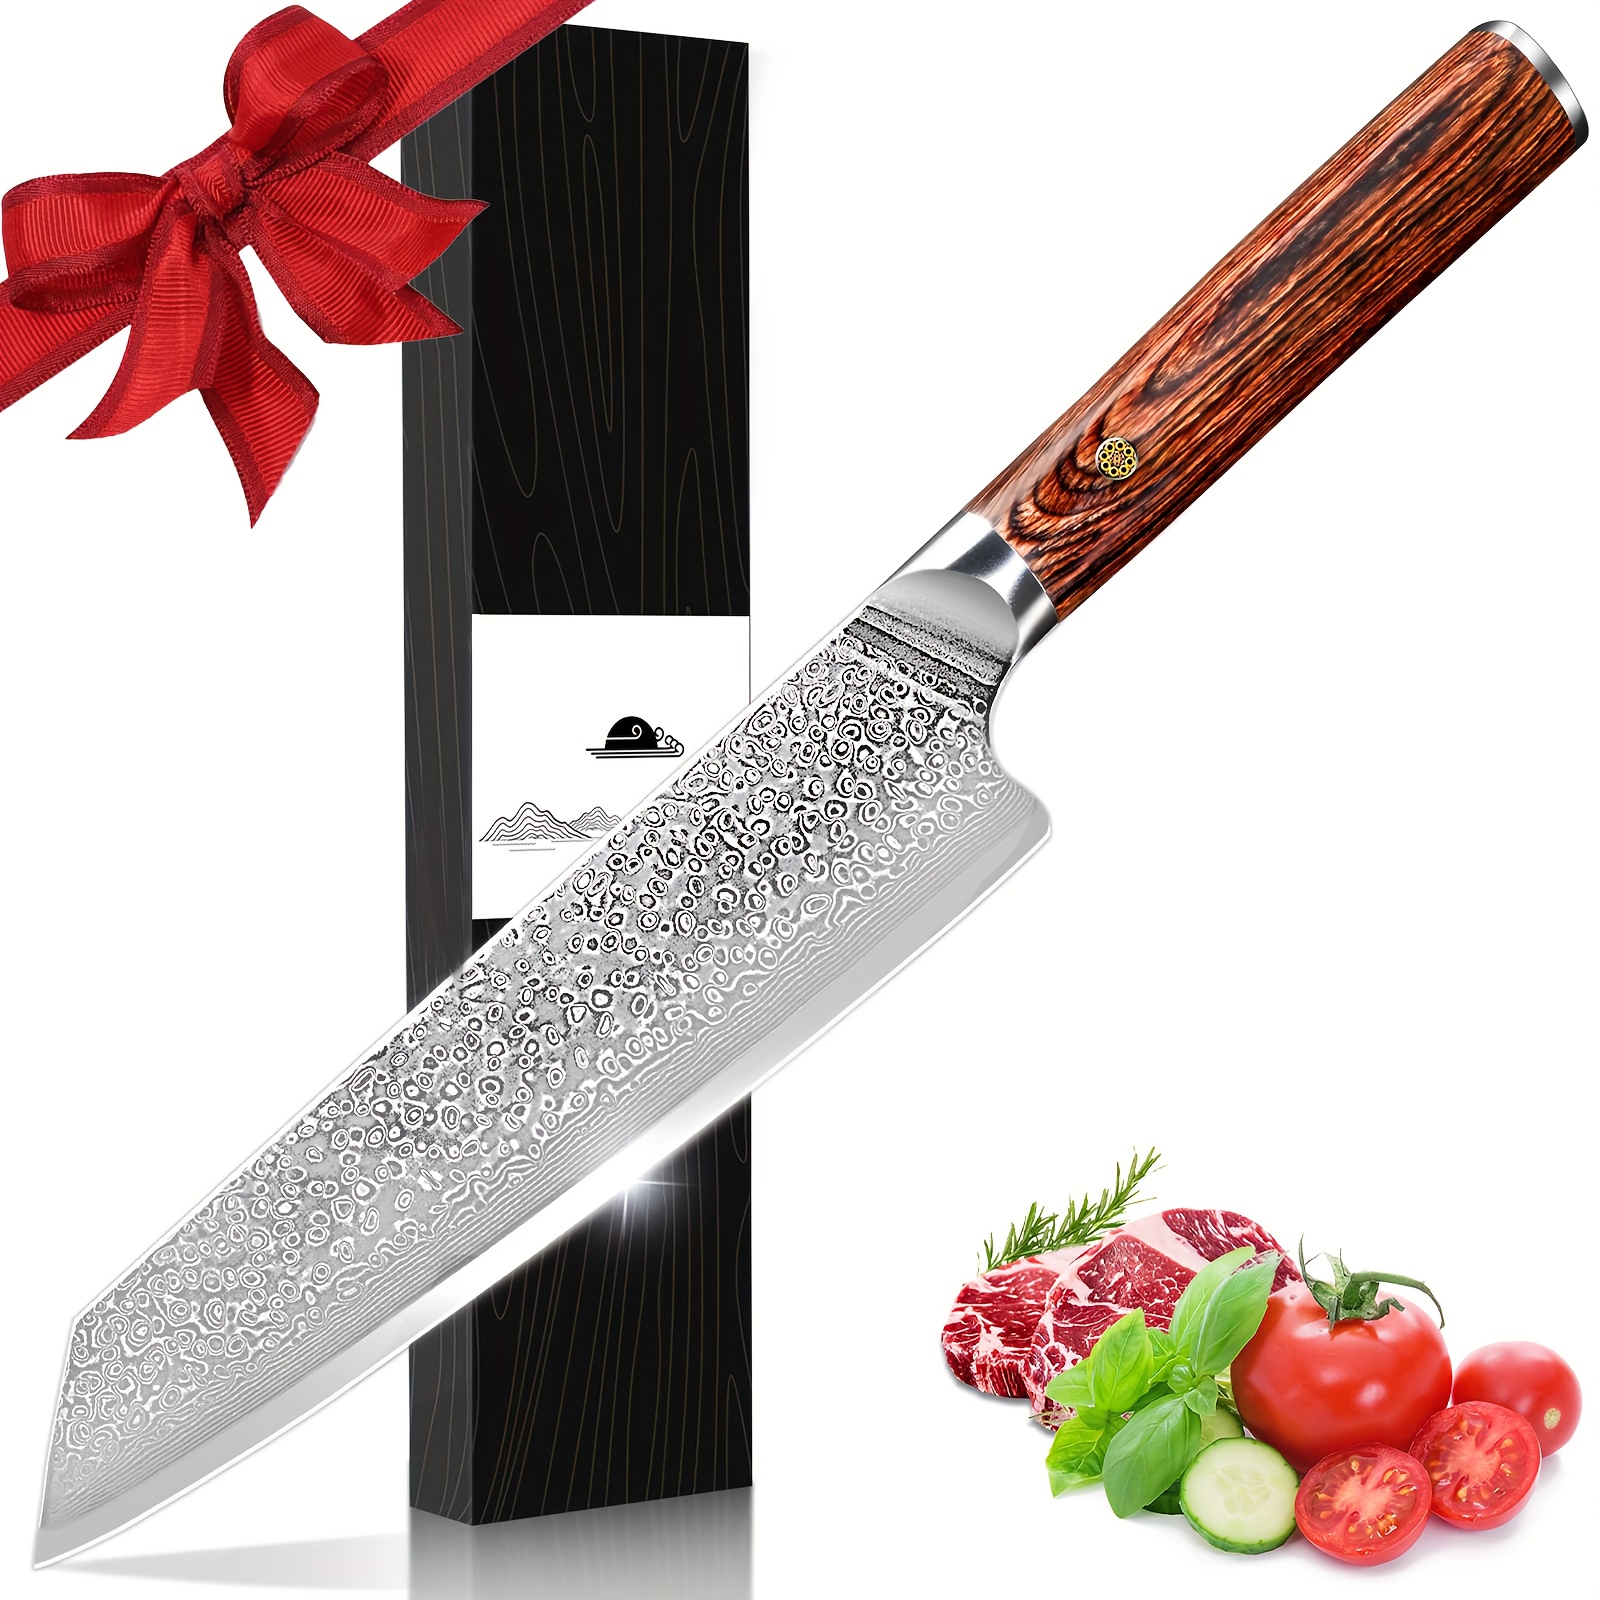 

Chef Knife 8 Inch, Super Sharp Pro Japanese Kitchen Knives, Damascus Chefs Knife Vg-10 High Carbon Stainless Steel, Ergonomic Wooden Handle Cooking Knife, Gift Box For Family & Restaurant